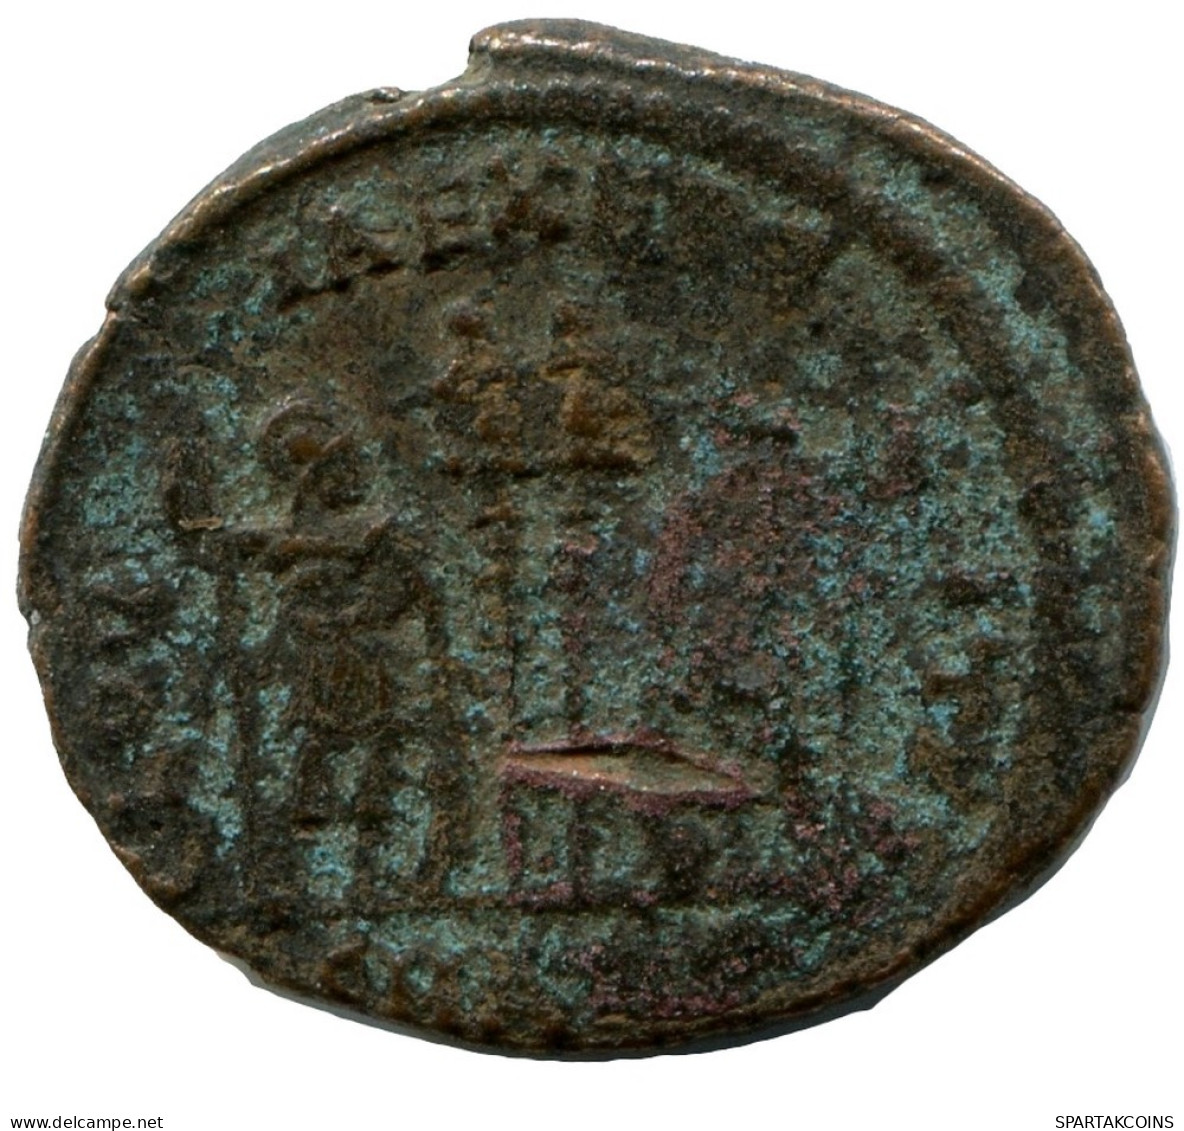 CONSTANTINE I MINTED IN ANTIOCH FOUND IN IHNASYAH HOARD EGYPT #ANC10700.14.E.A - The Christian Empire (307 AD Tot 363 AD)